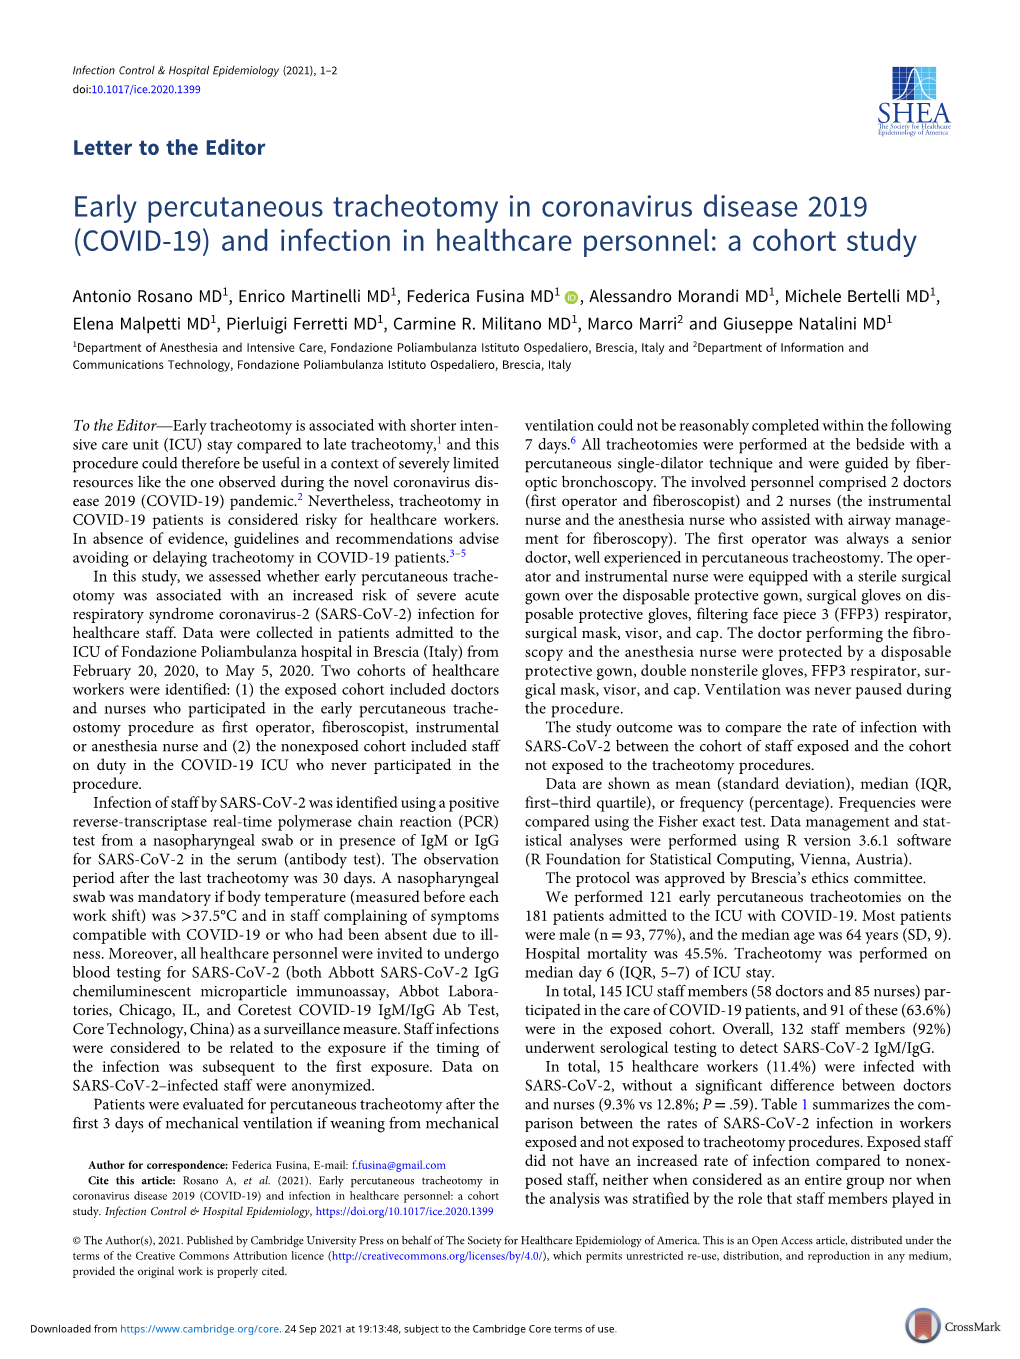 Early Percutaneous Tracheotomy in Coronavirus Disease 2019 (COVID-19) and Infection in Healthcare Personnel: a Cohort Study